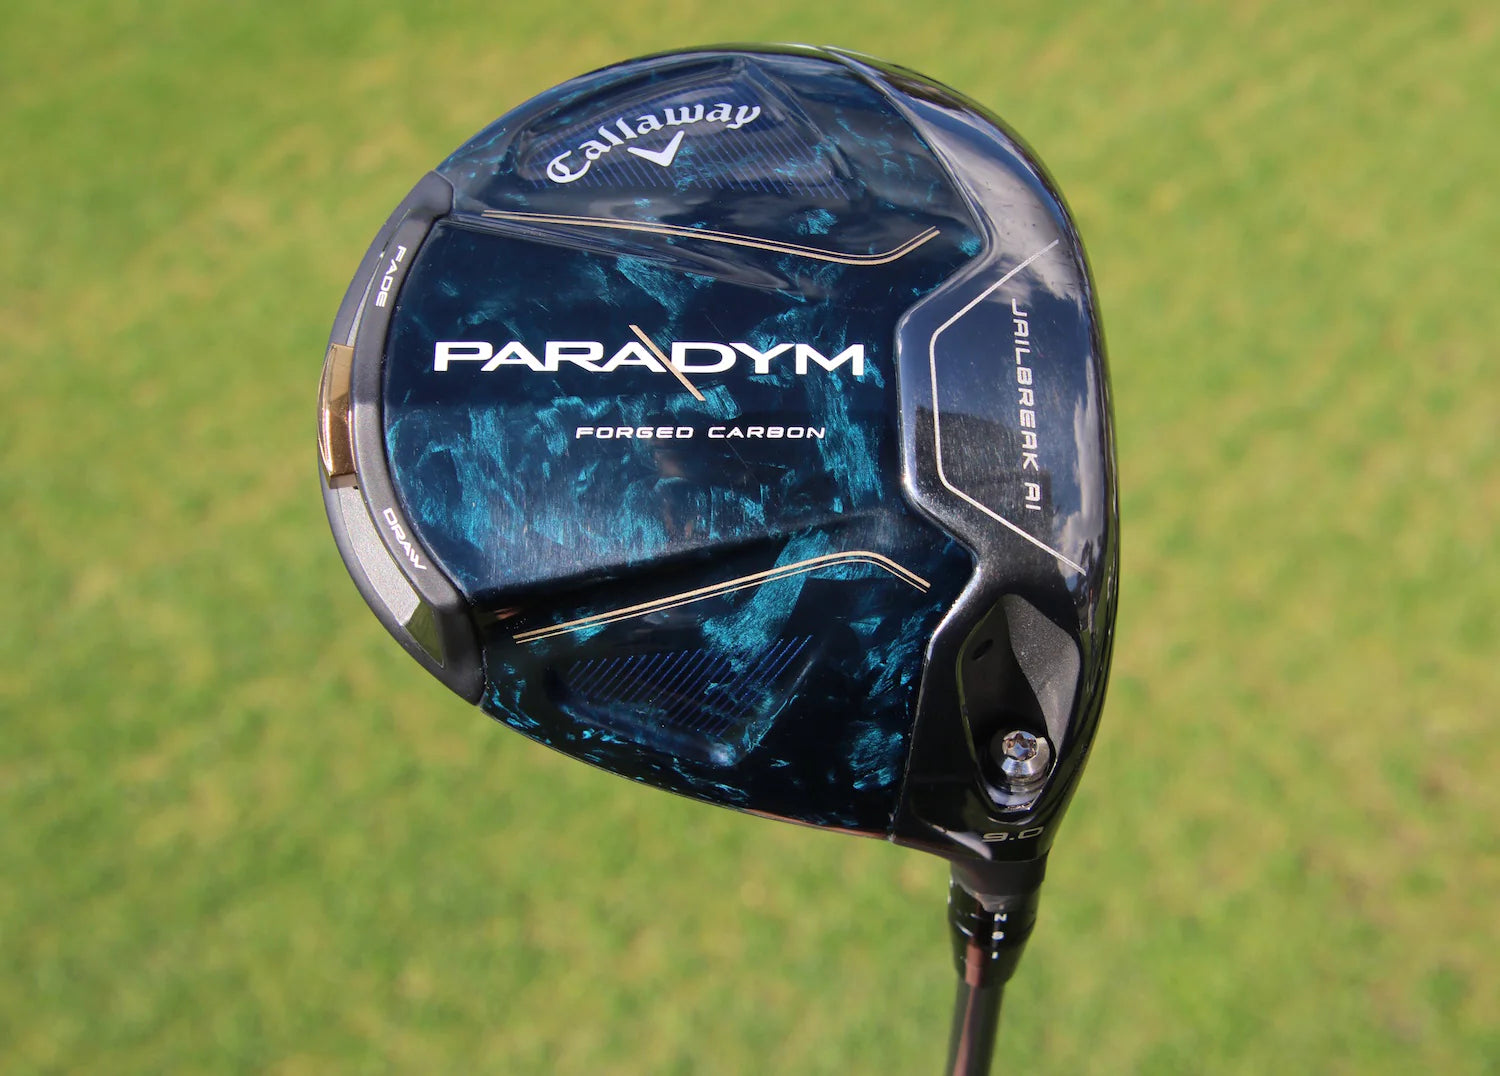 pros and cons of callaway paradym driver